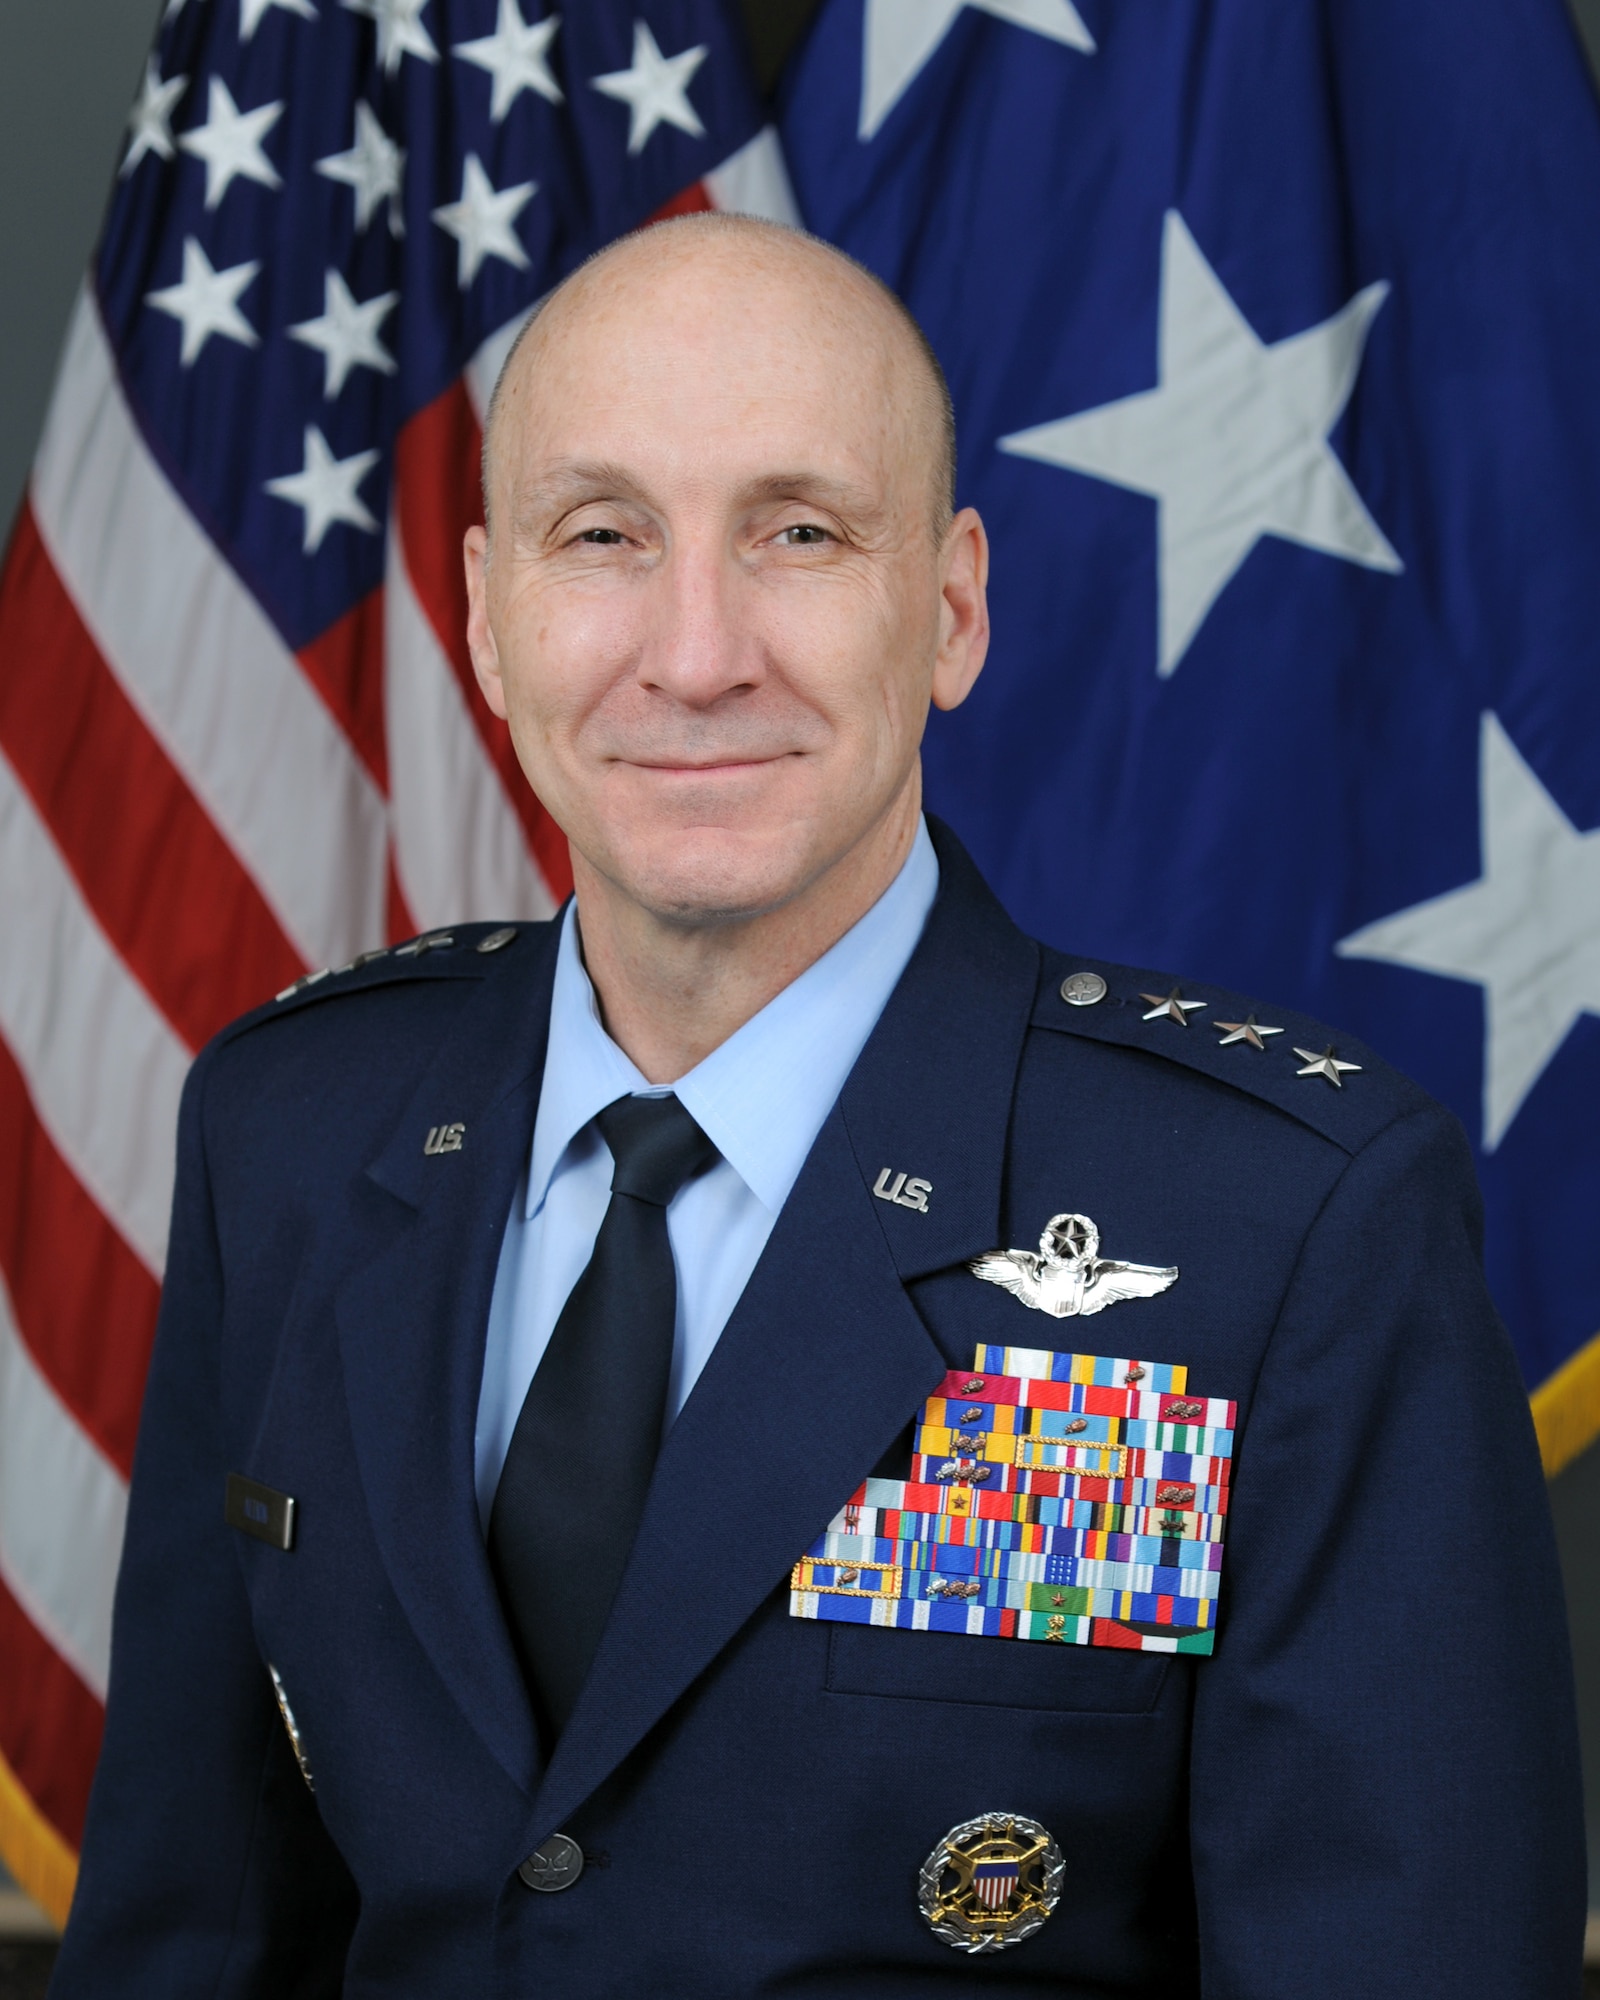 Secretary of Defense Mark T. Esper announced Aug. 14, President Donald J. Trump has nominated Lt. Gen. David W. Allvin to be the next Air Force Vice Chief of Staff. (U.S. Air Force photo by JoAnne Sorrentino)